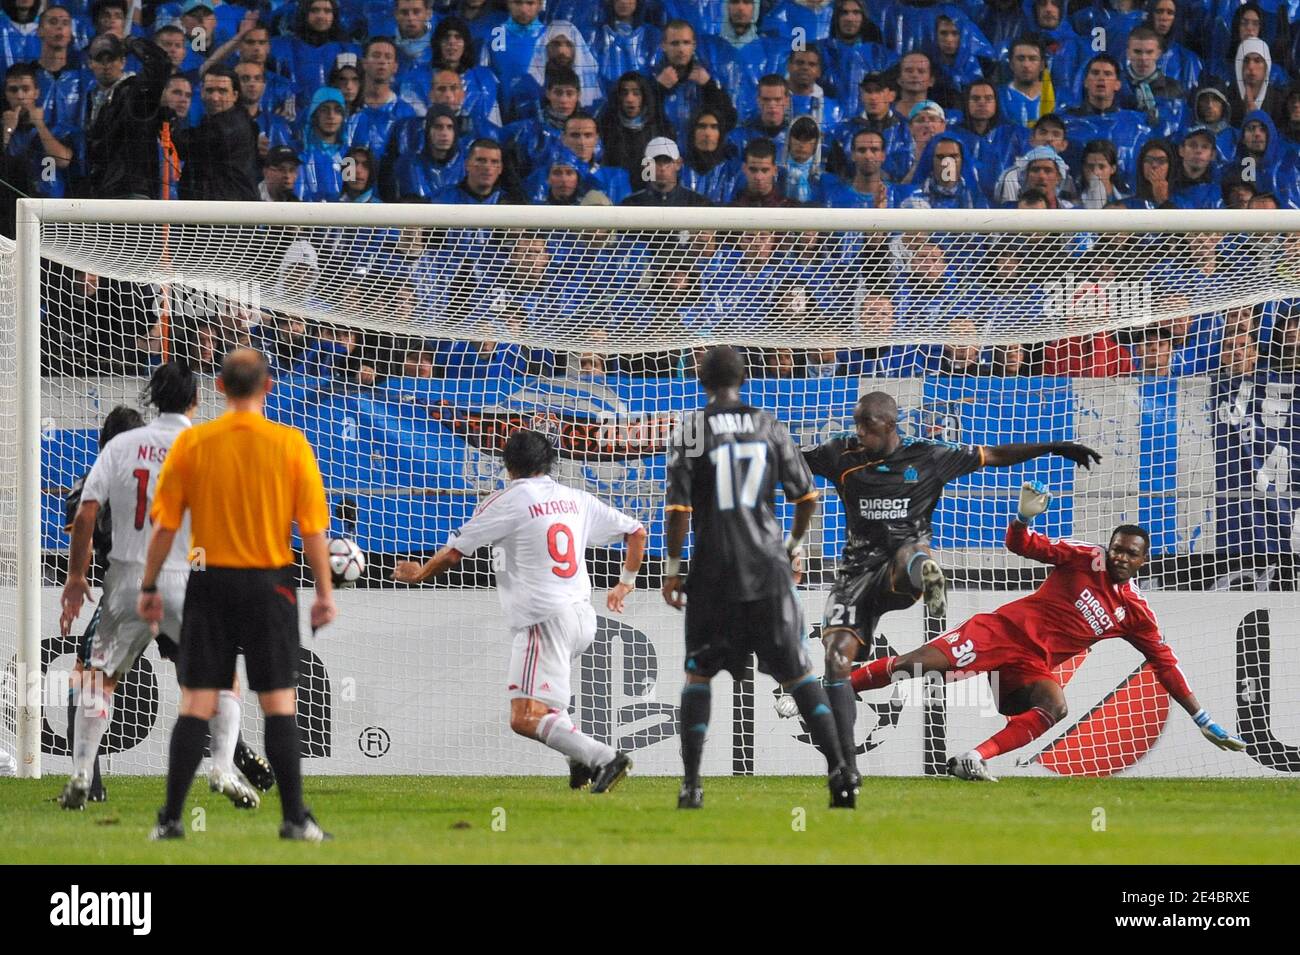 Milan's Filippo Inzaghi scores his first goal during the UEFA Champions League soccer match, Olympique de Marseille vs AC Milan at the Velodrome stadium in Marseille, France on September 15, 2009. Milan won 2-1. Photo by Stephane Reix/ABACAPRESS.COM Stock Photo